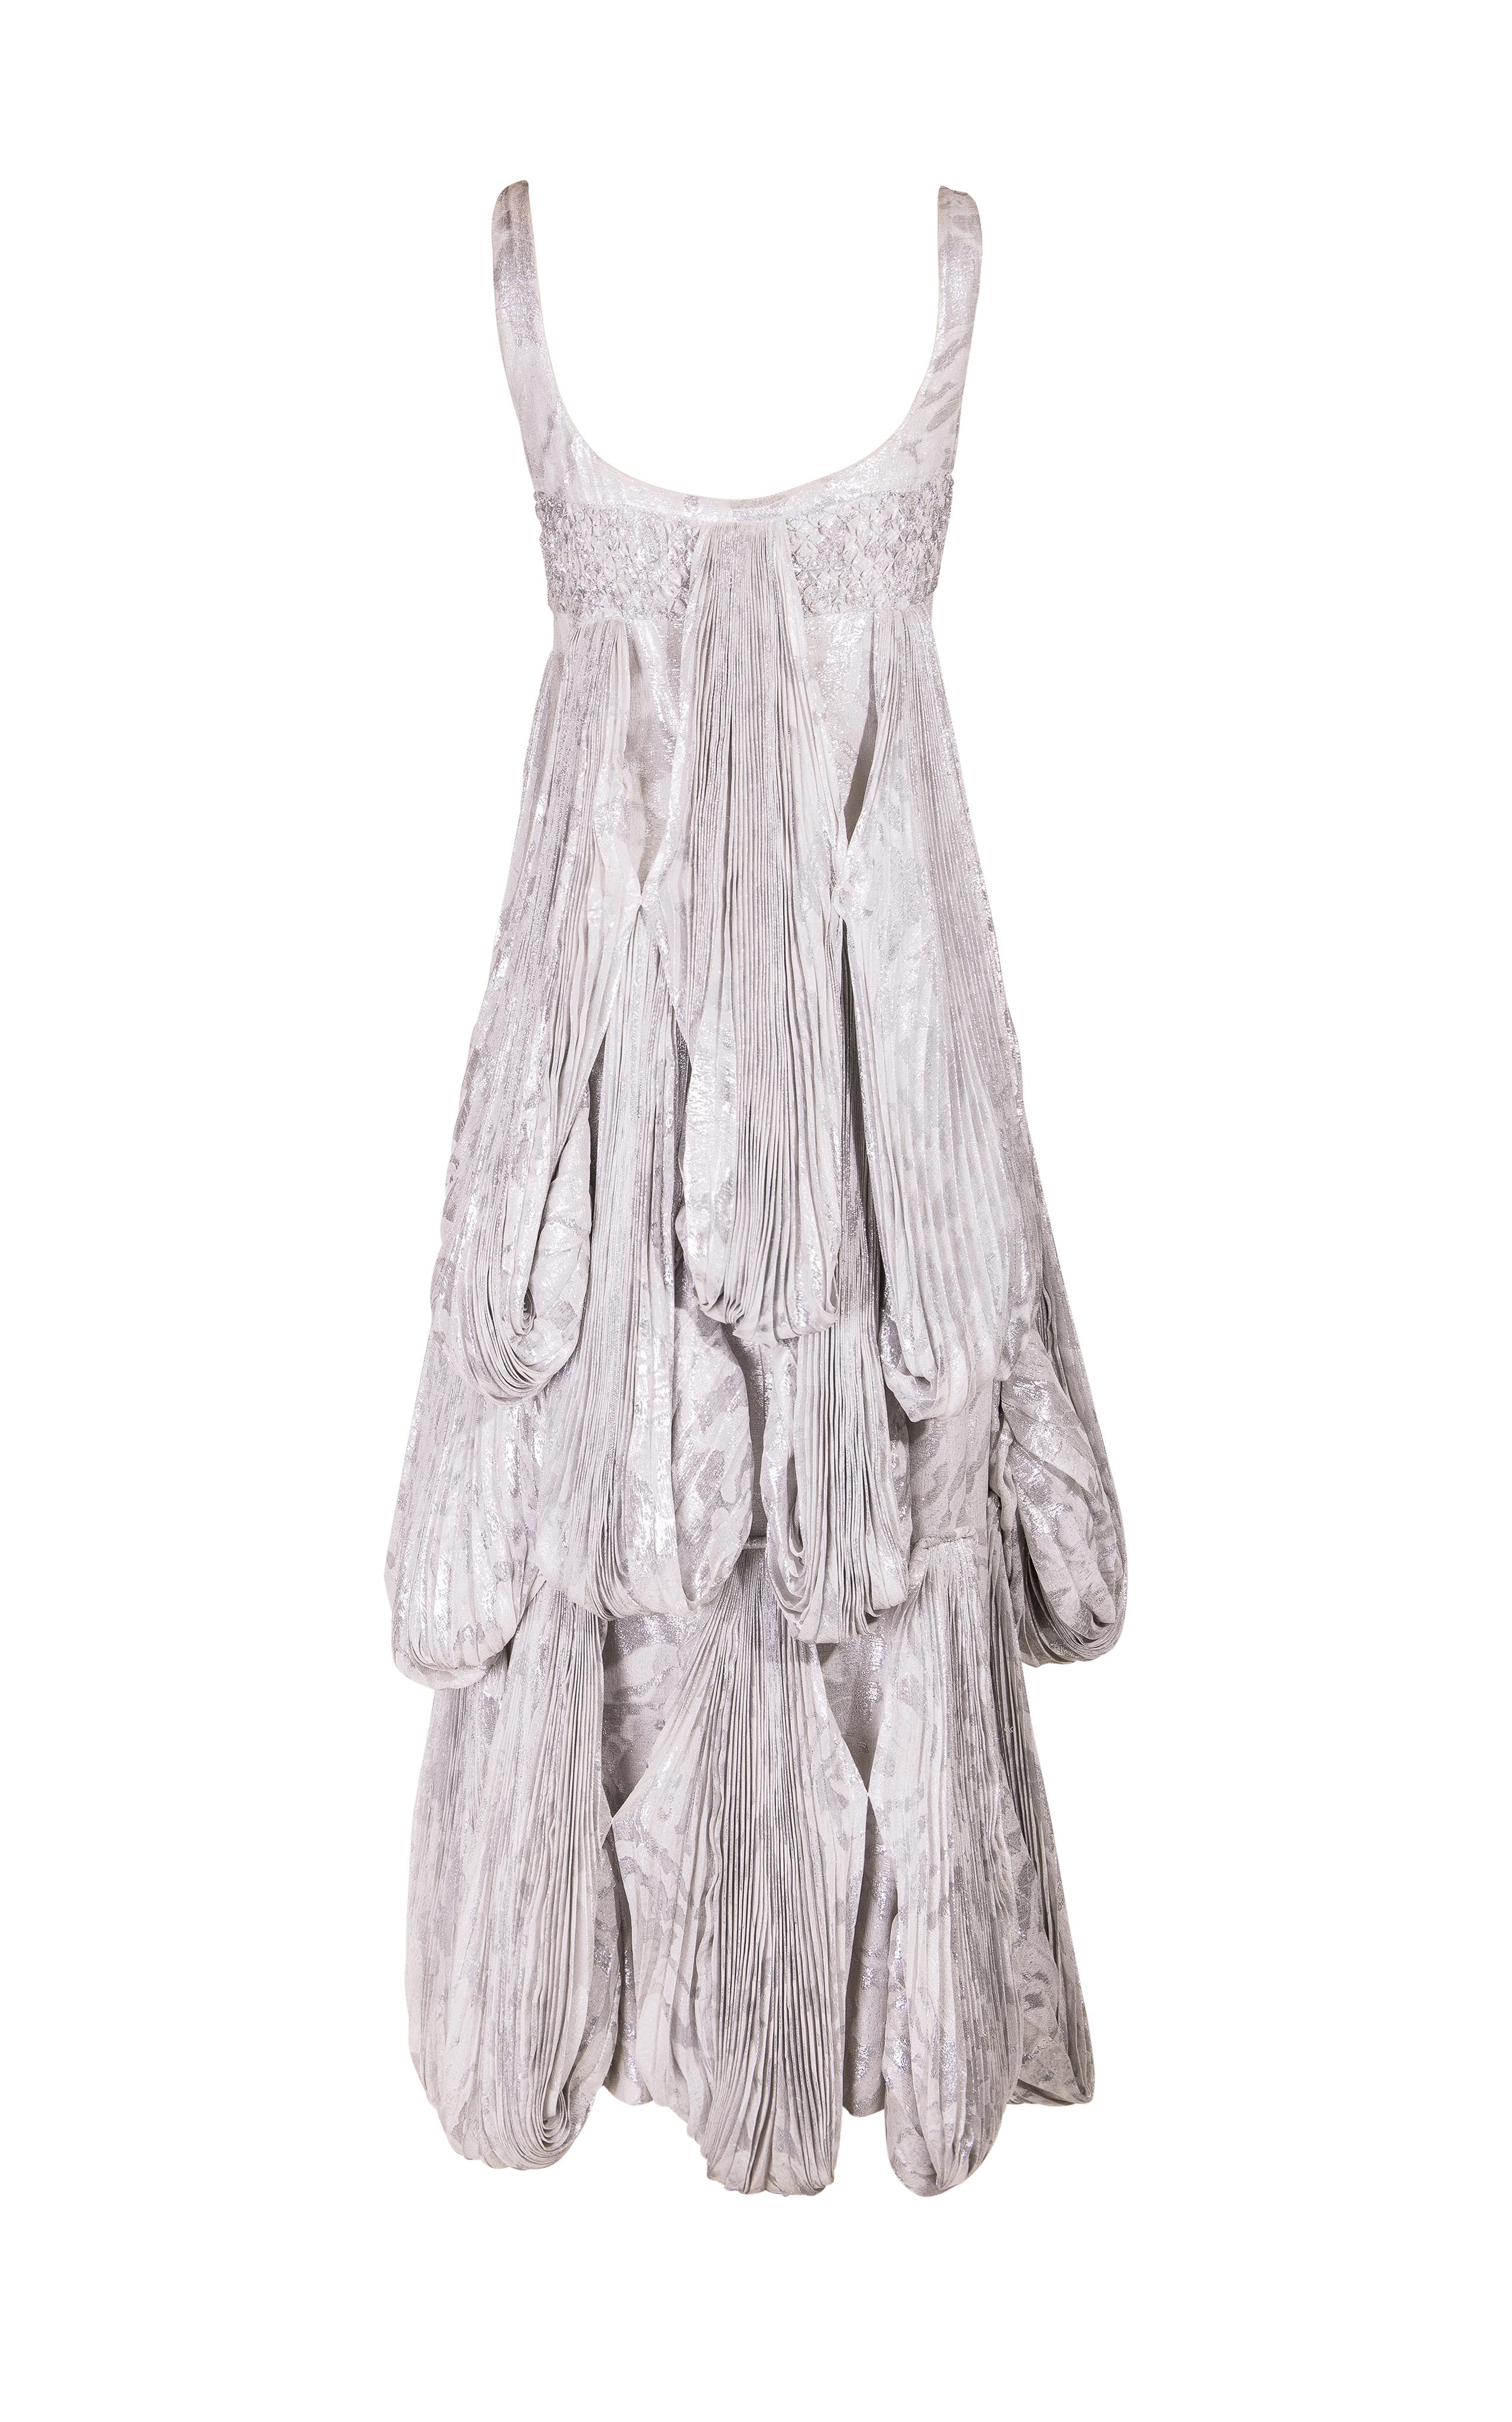 Women's C. 2008 Byblos by Manuel Facchini Silver Pleated Loop Gown